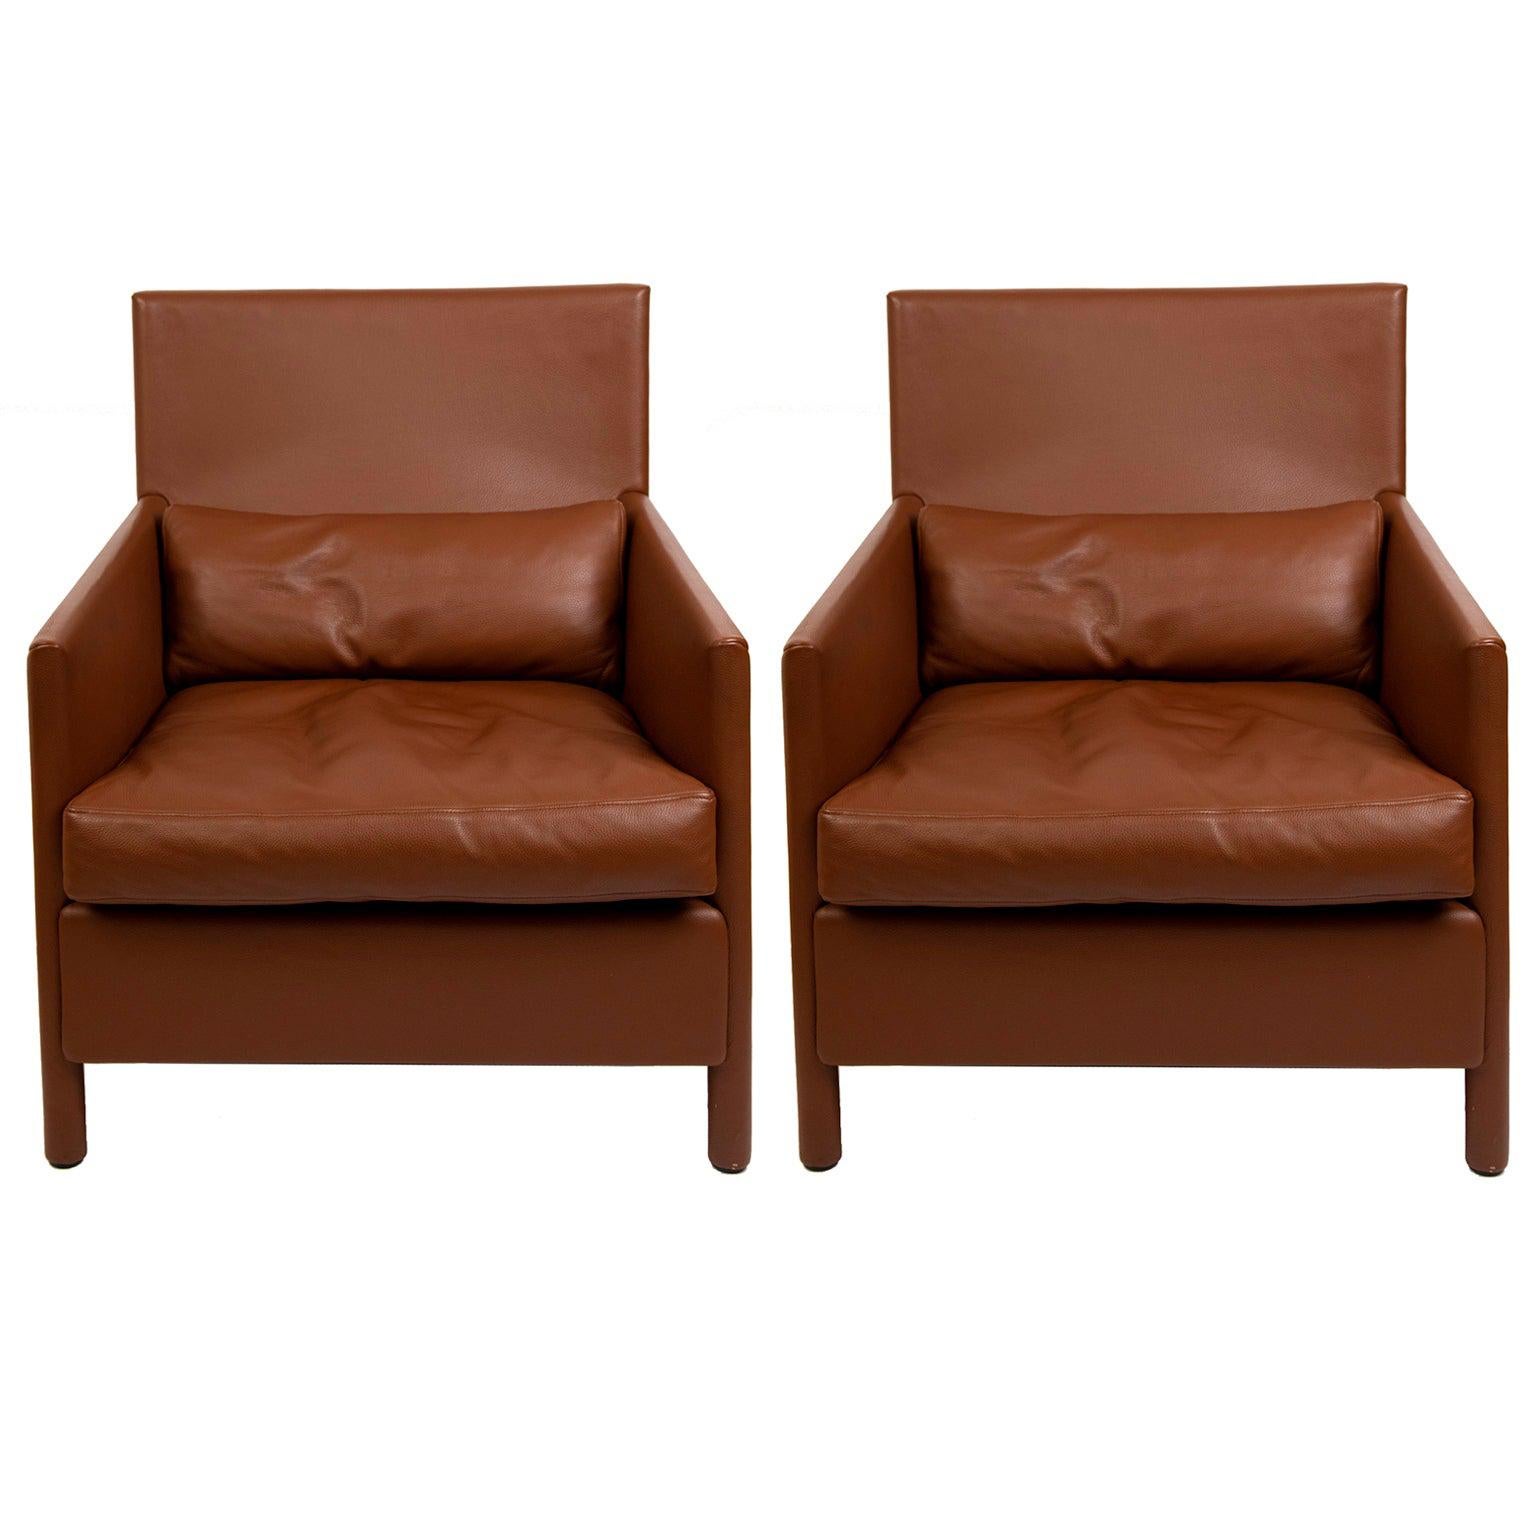 Pair of Vintage Contemporary Full Grain Leather Lounge Chairs